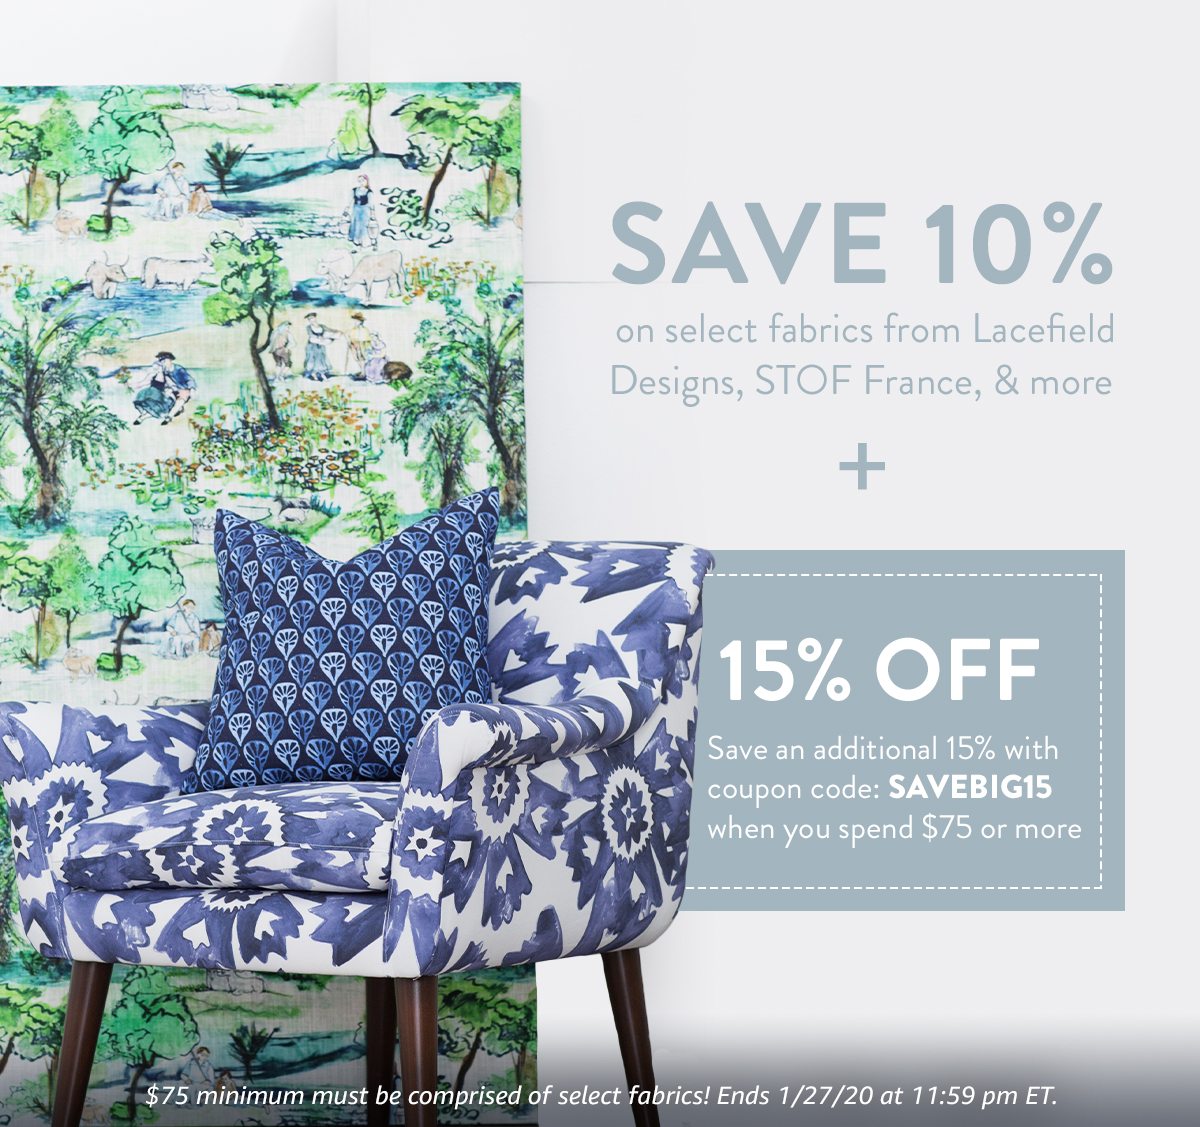 SAVE 10% + 15% OFF | $75 minimum must be comprised of select fabrics! Ends 1/27/20 at 11:59 pm ET.